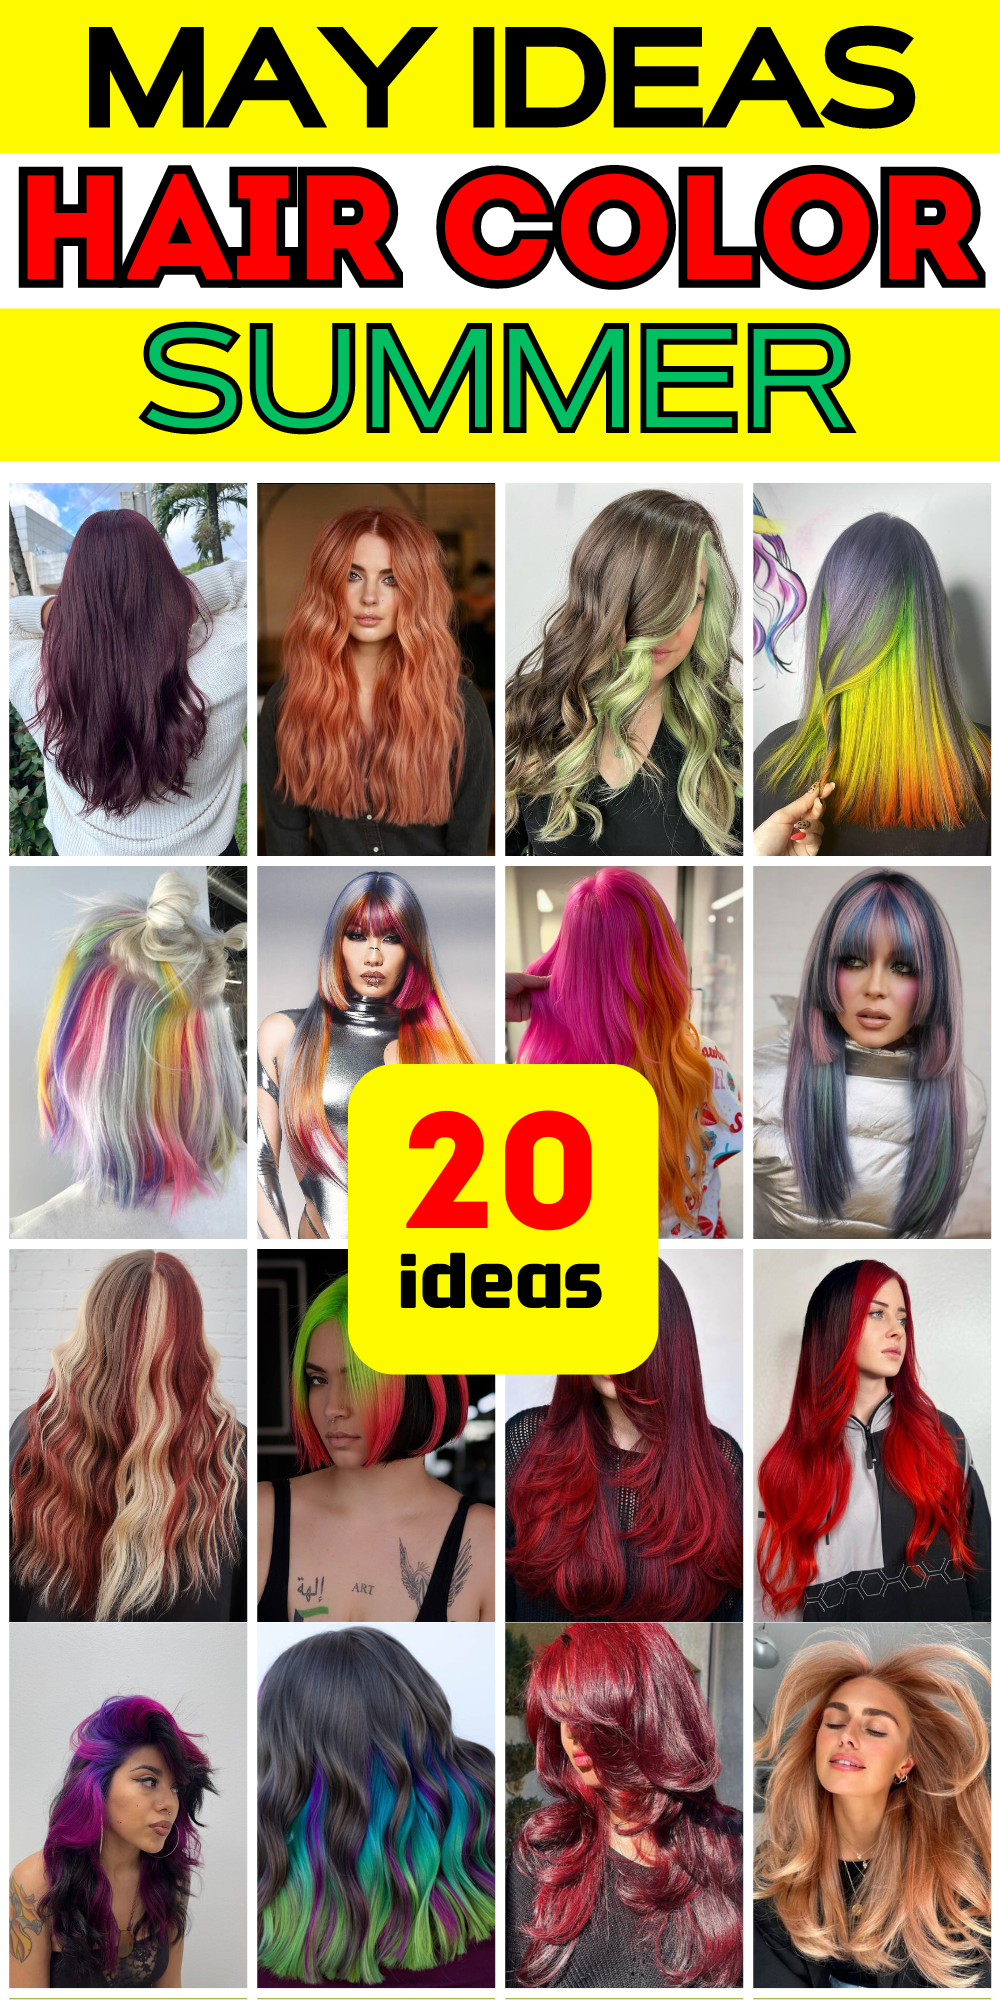 May Hair Color Trends: Embrace Edgy, Bold and Pastel Hues This Spring